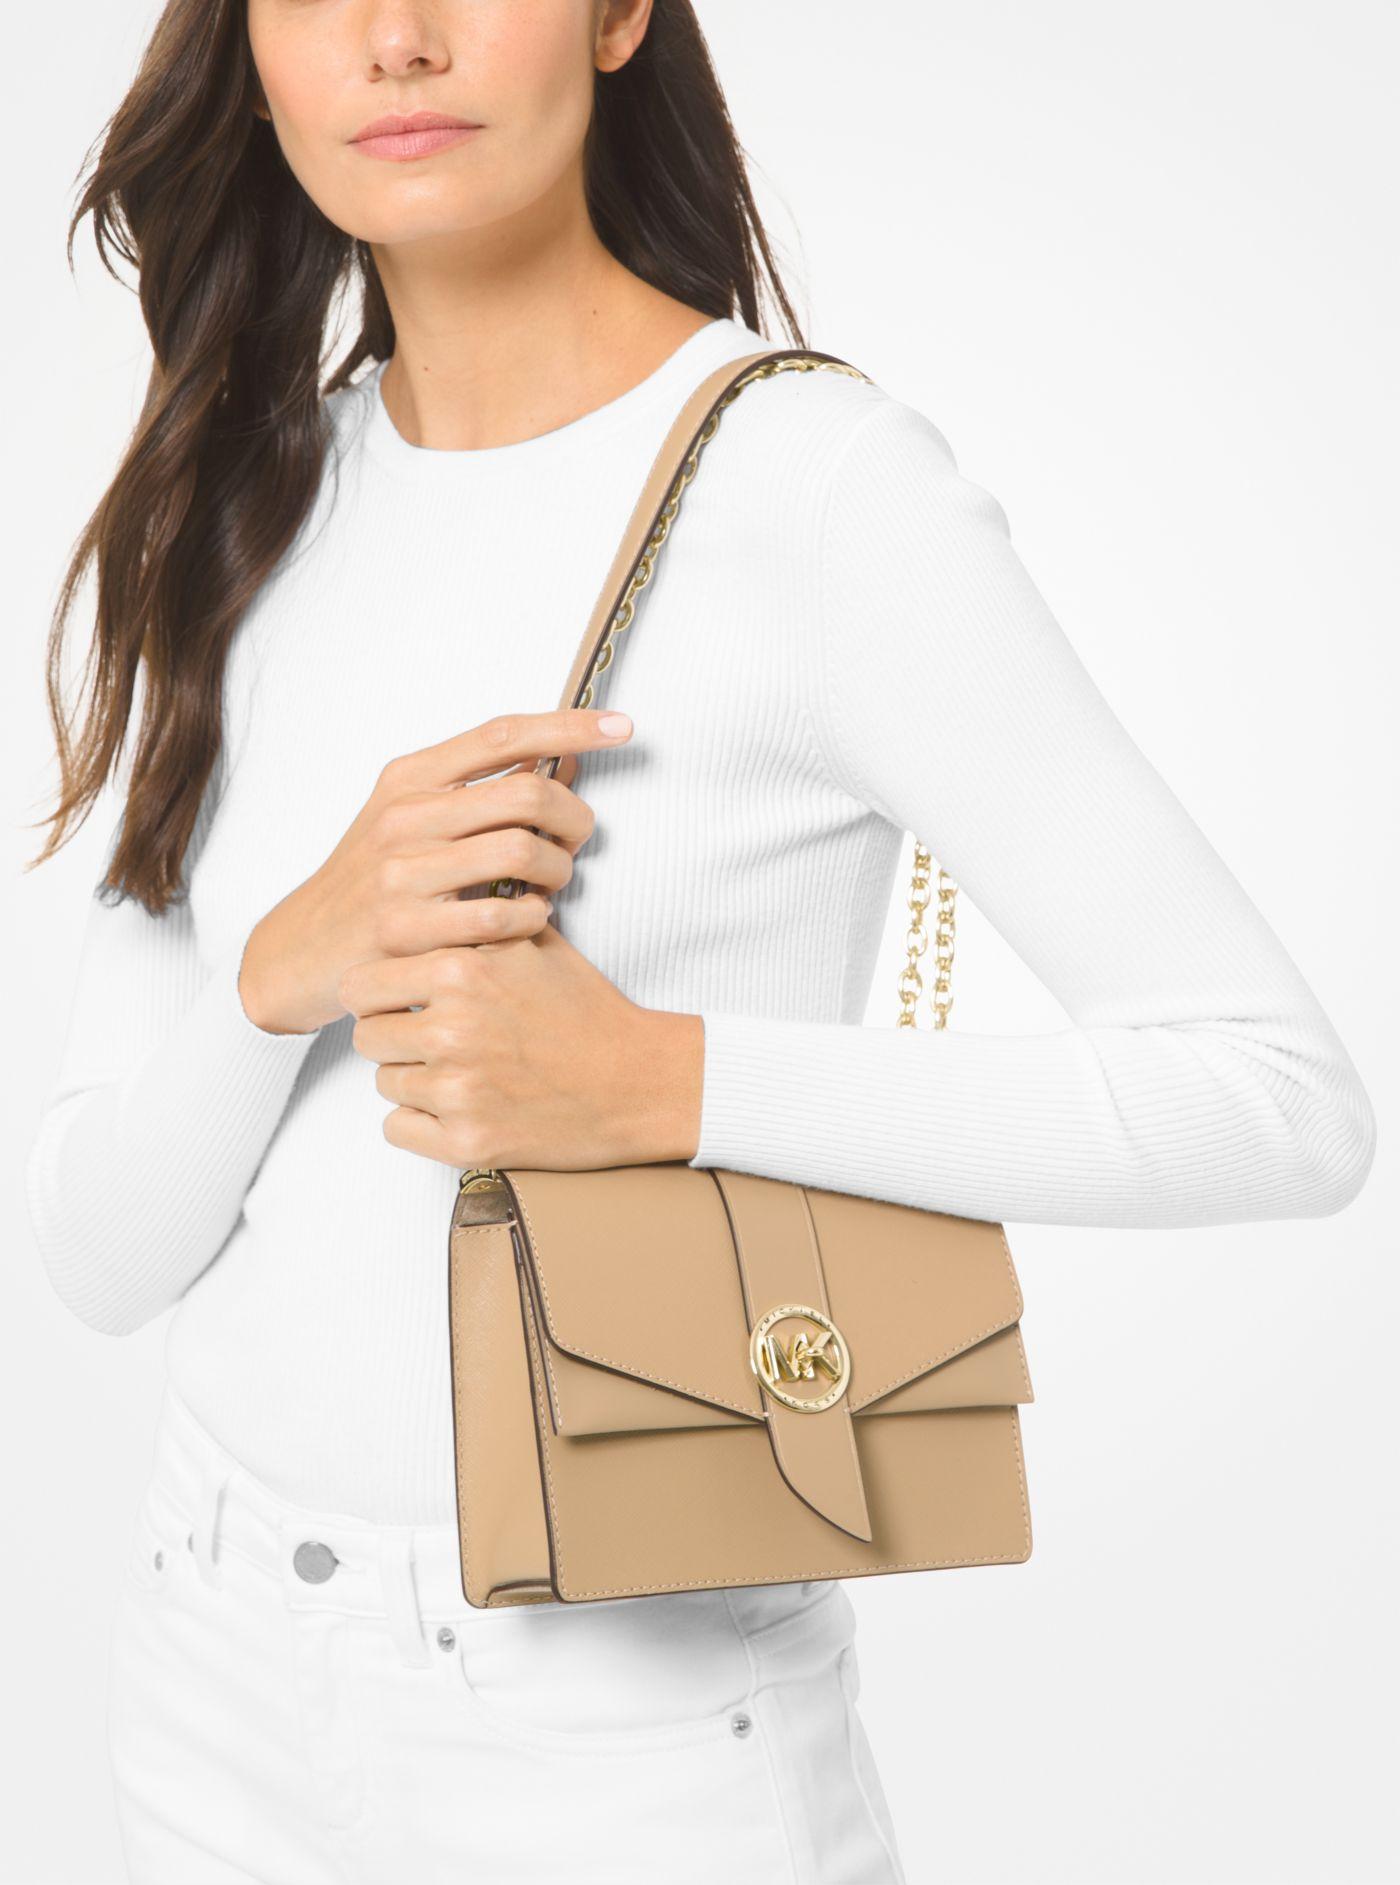 Michael Kors Greenwich Small Saffiano Leather Crossbody Bag in Camel  (Natural) - Lyst